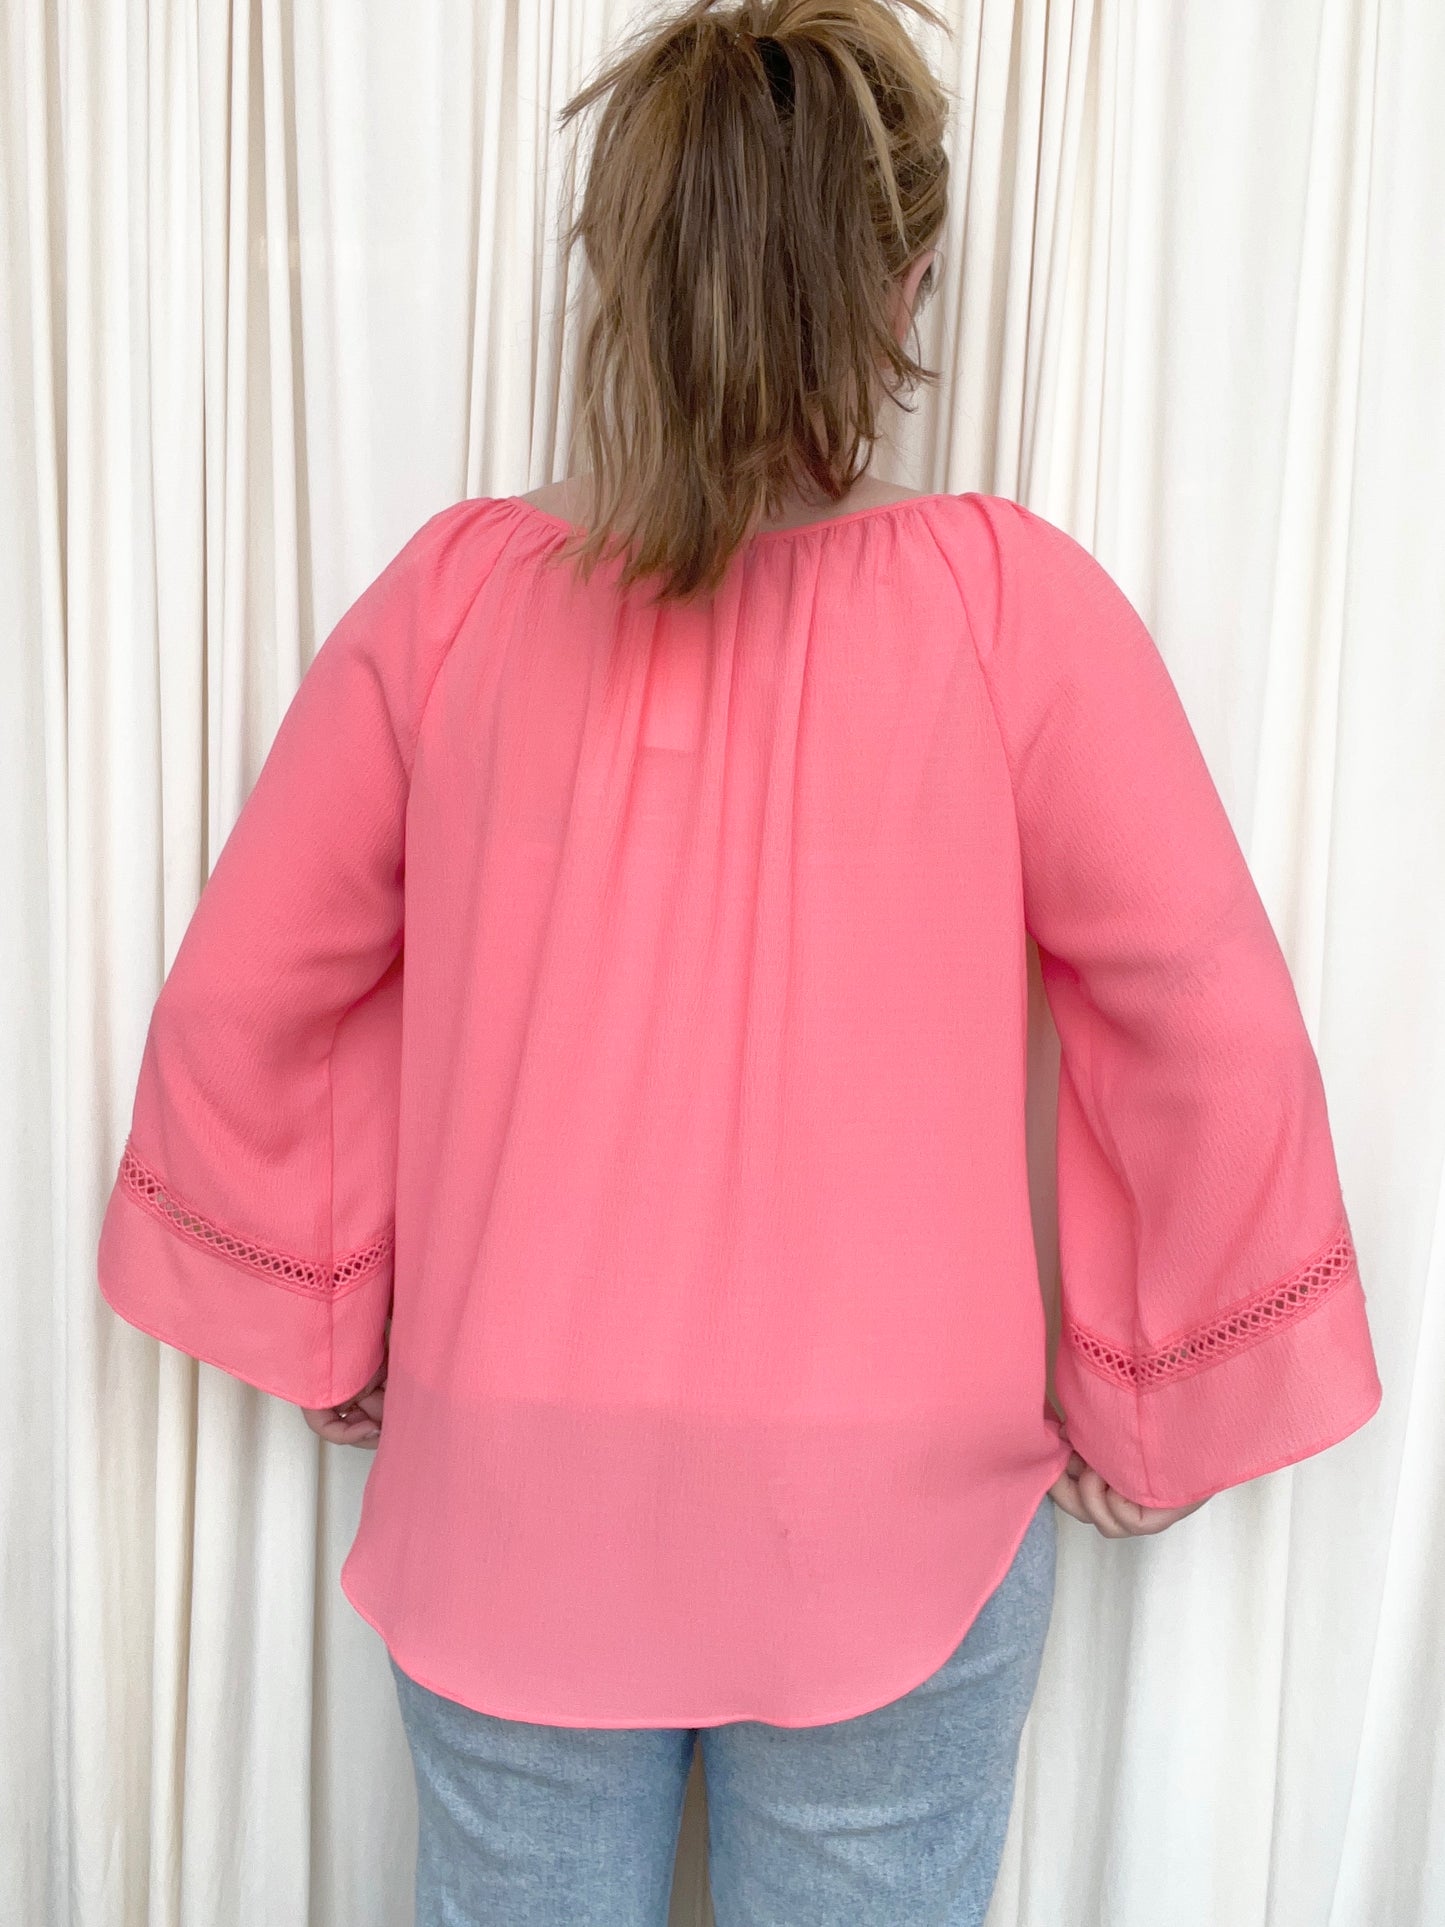 Coral Tie Front Blouse - Large